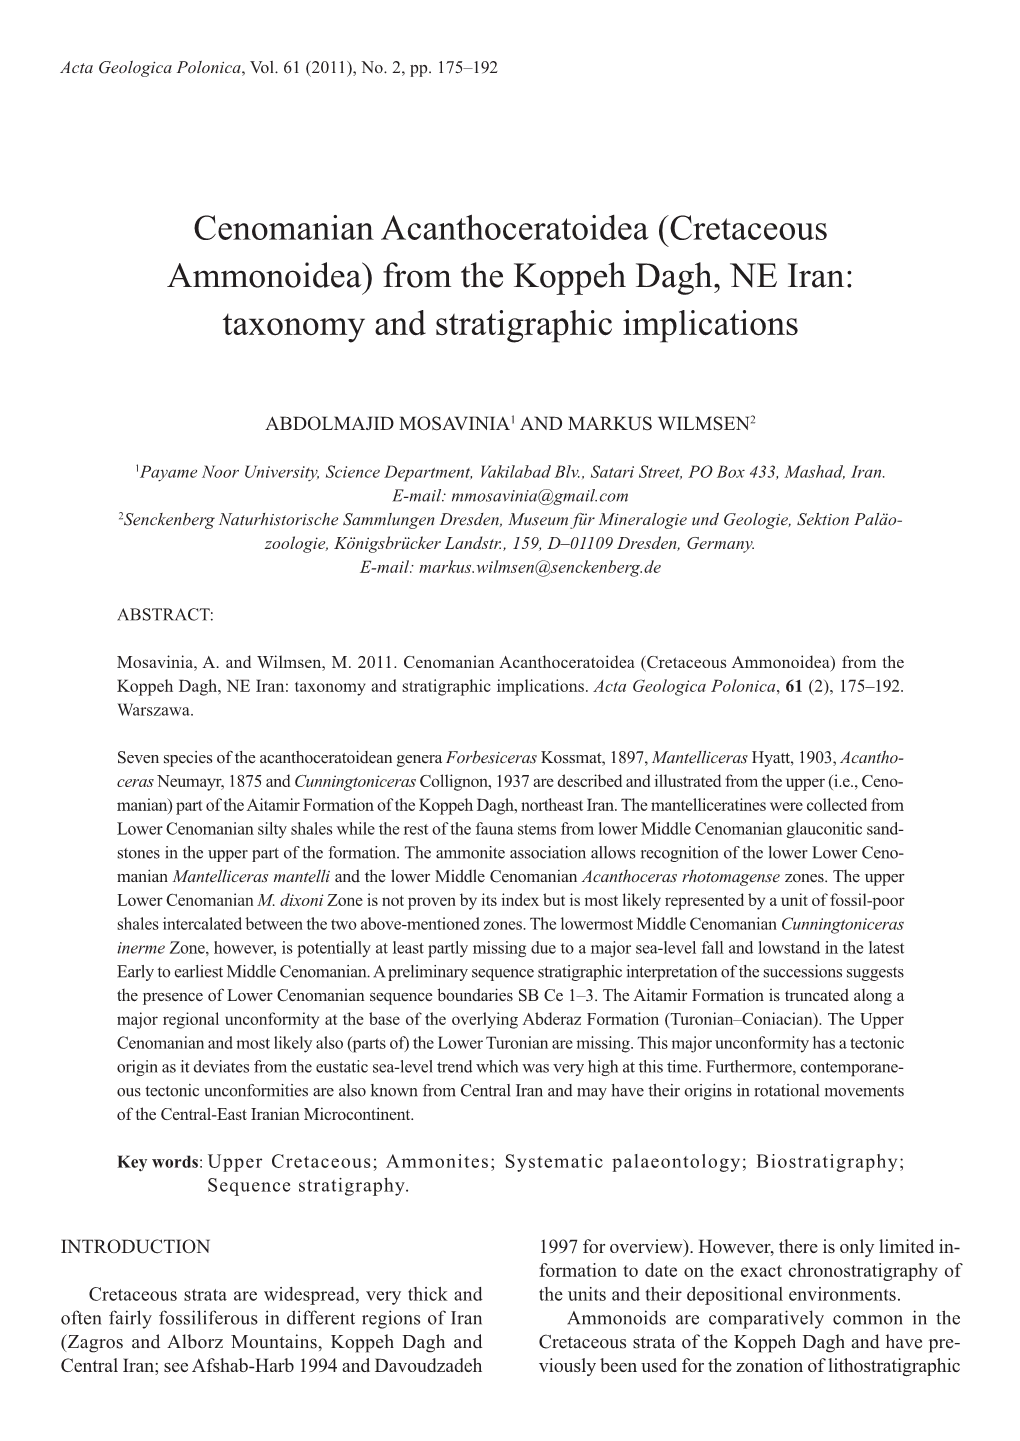 (Cretaceous Ammonoidea) from the Koppeh Dagh, NE Iran: Taxonomy and Stratigraphic Implications